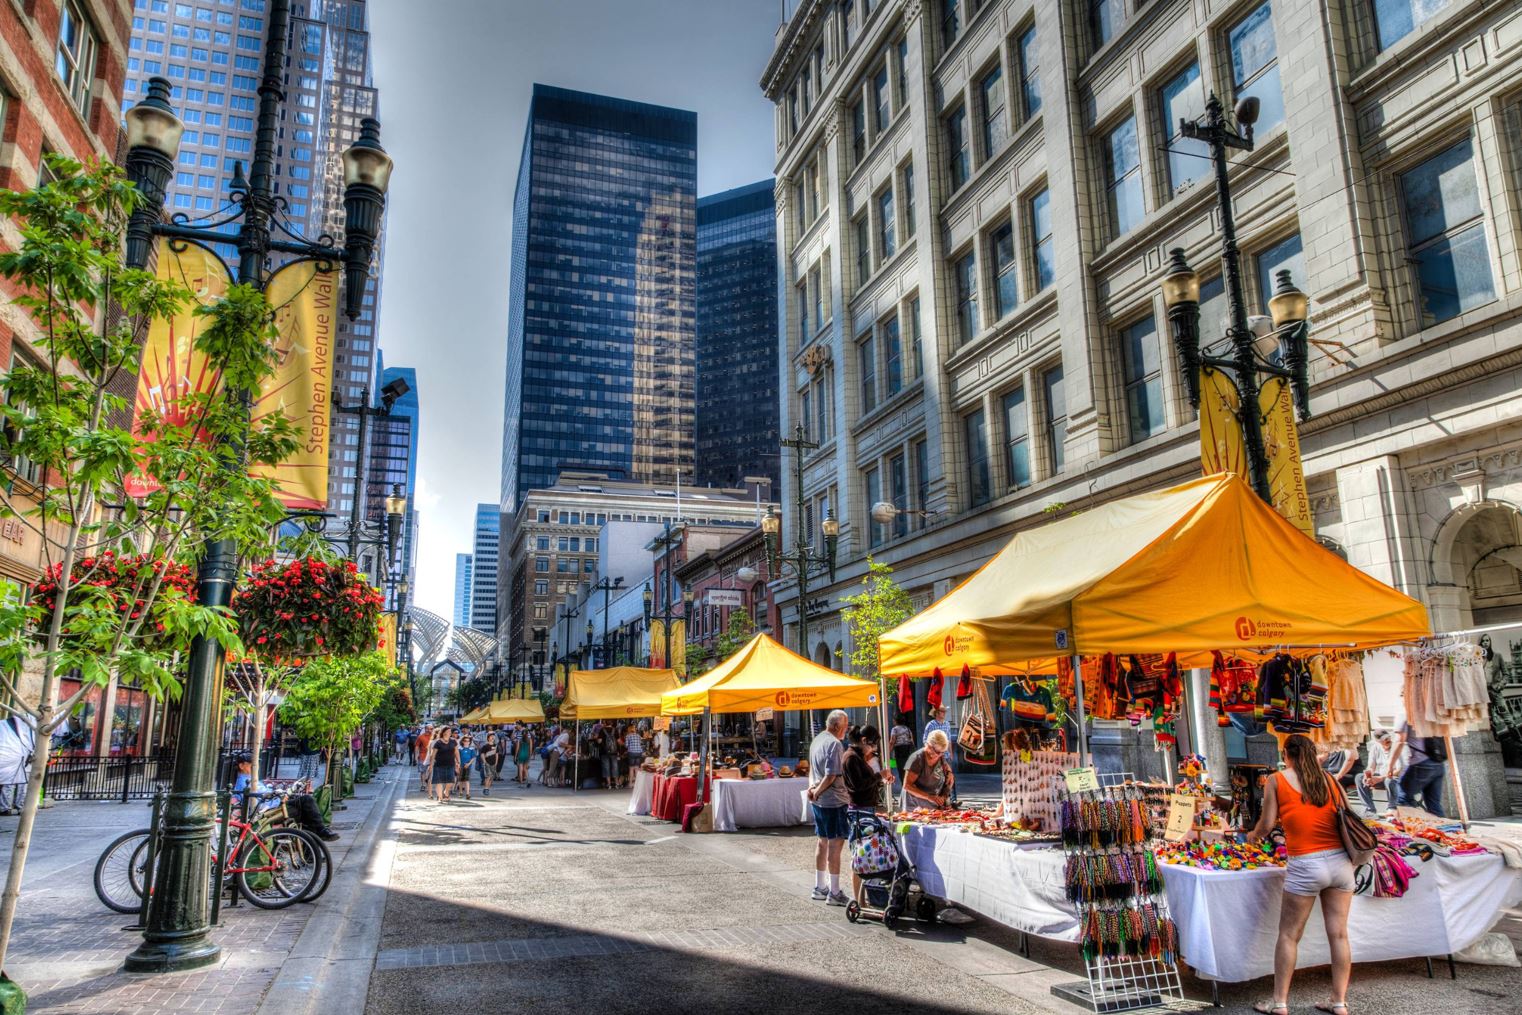 Stephen Avenue amenities makes Calgary a great place to live, work and play